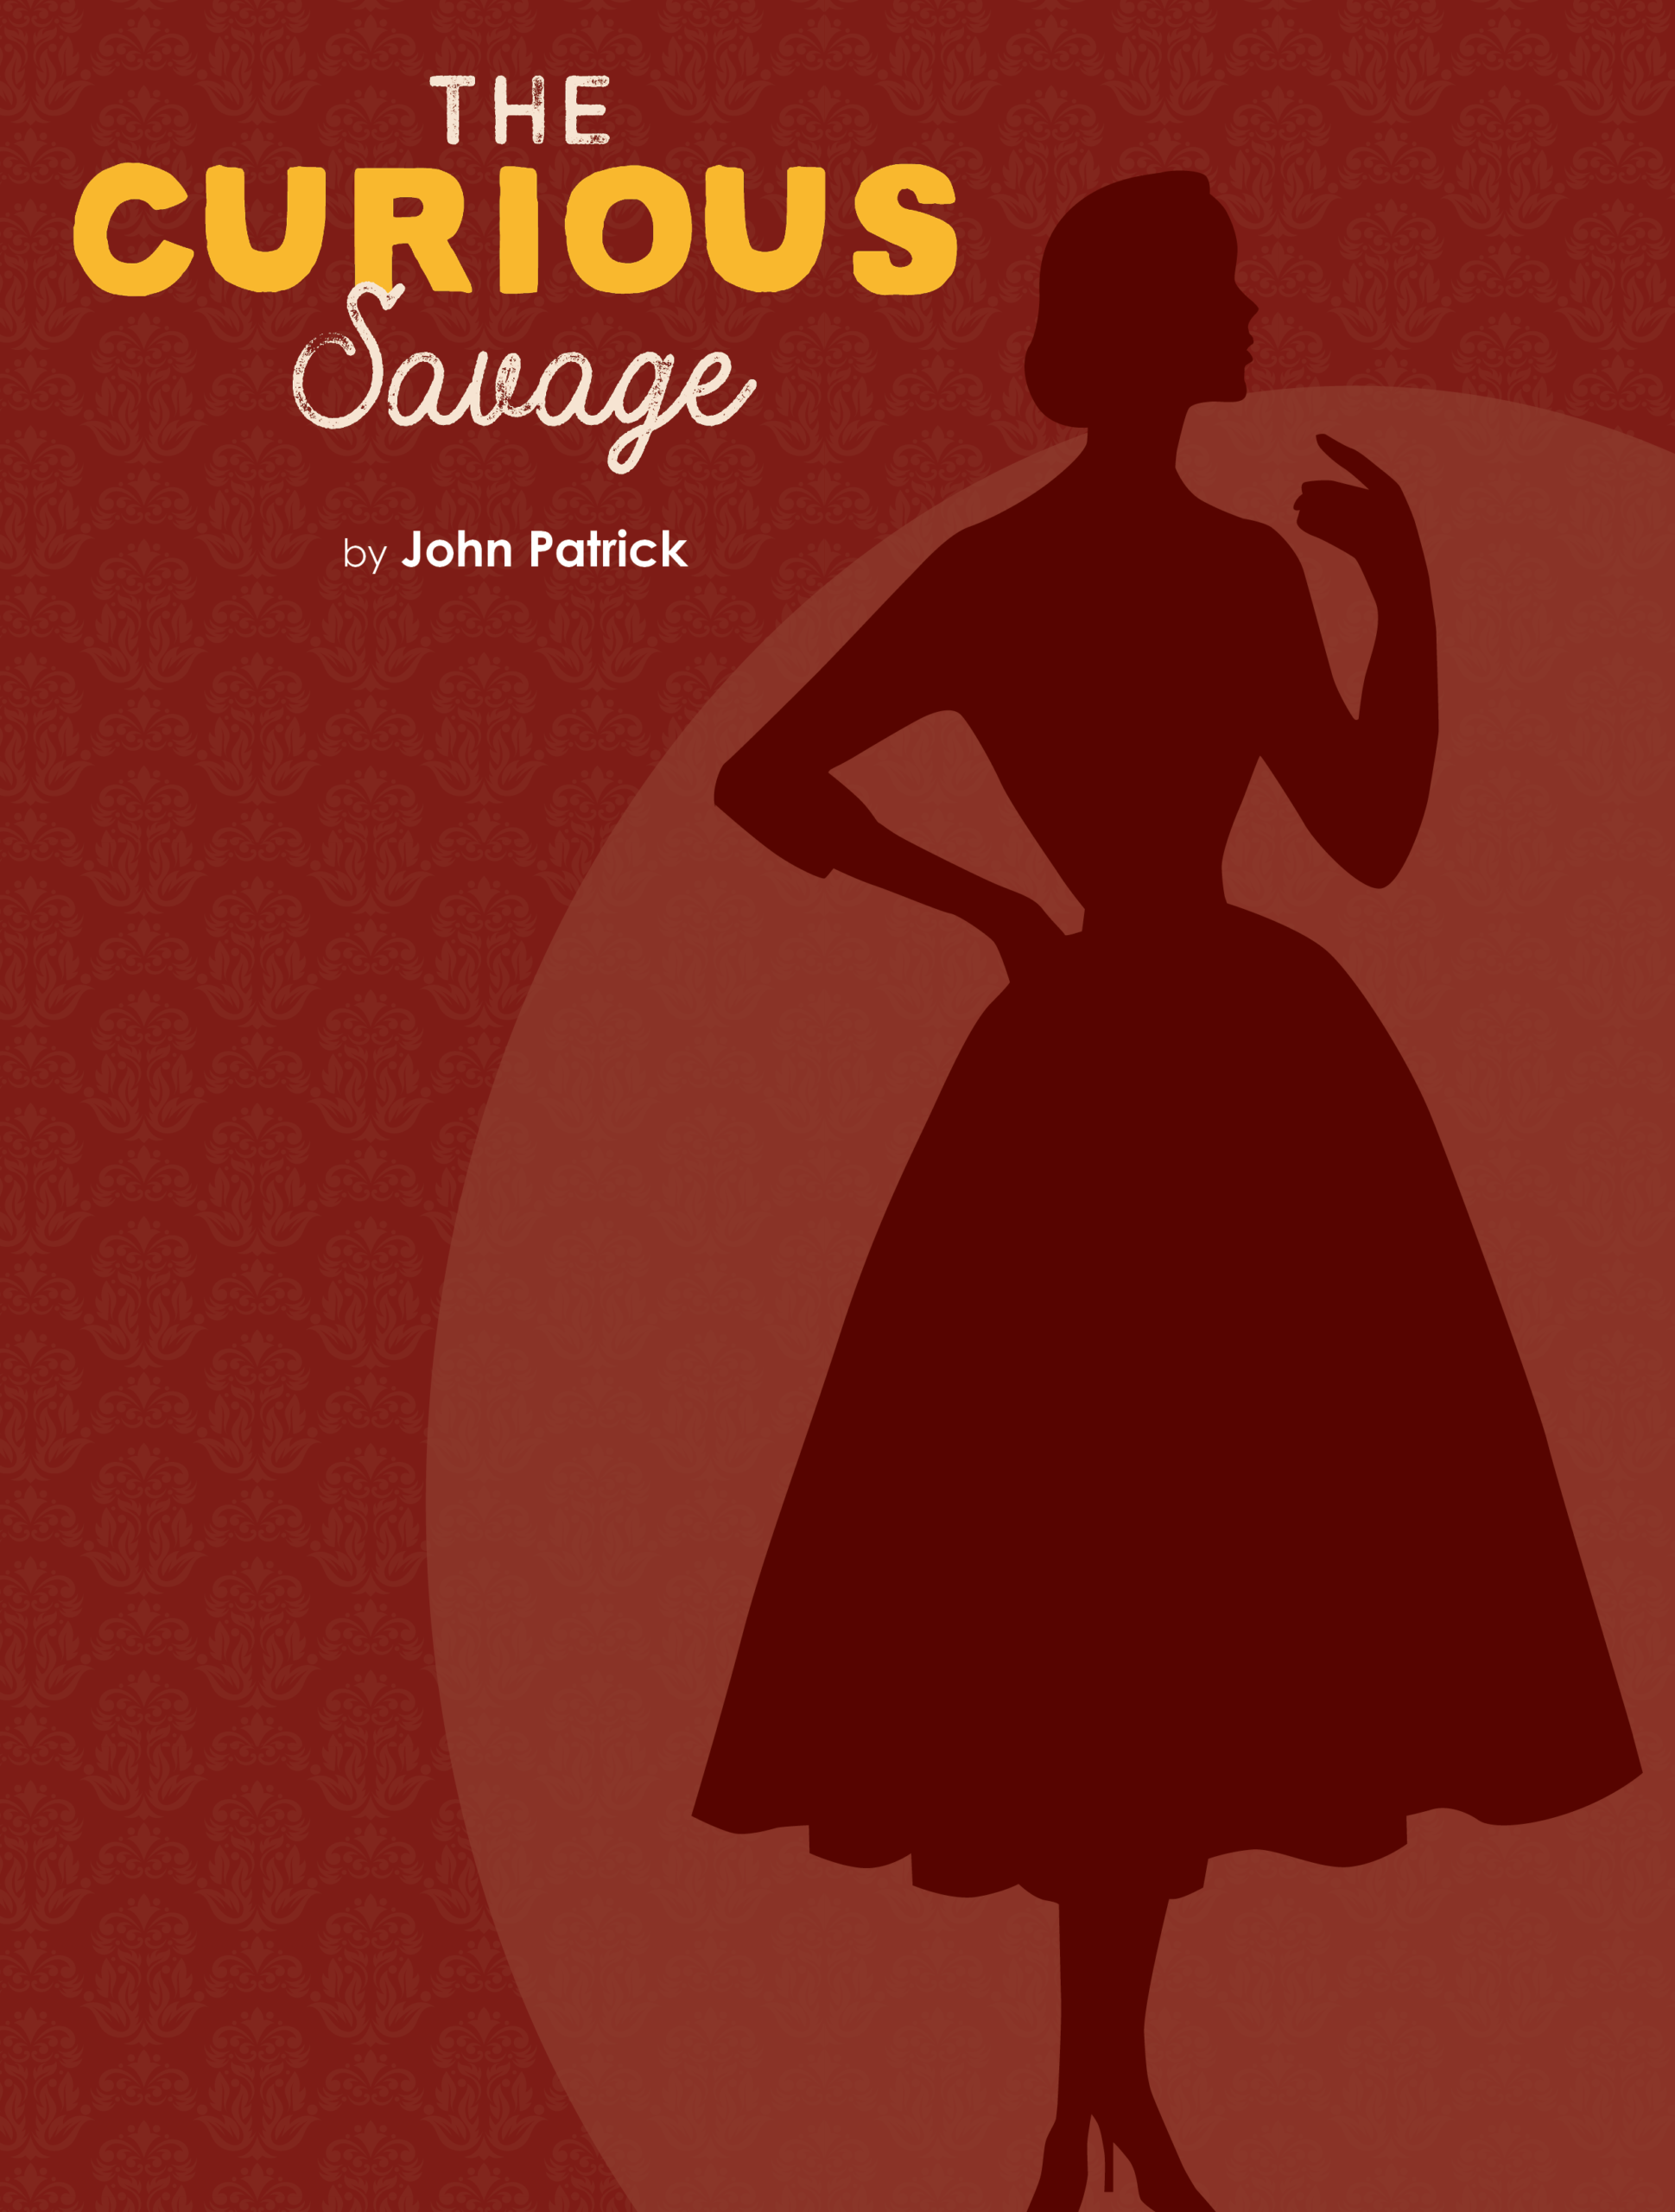 A silhouette of a woman in a shirtwaist dress with the title The Curious Stranger by John Patrick